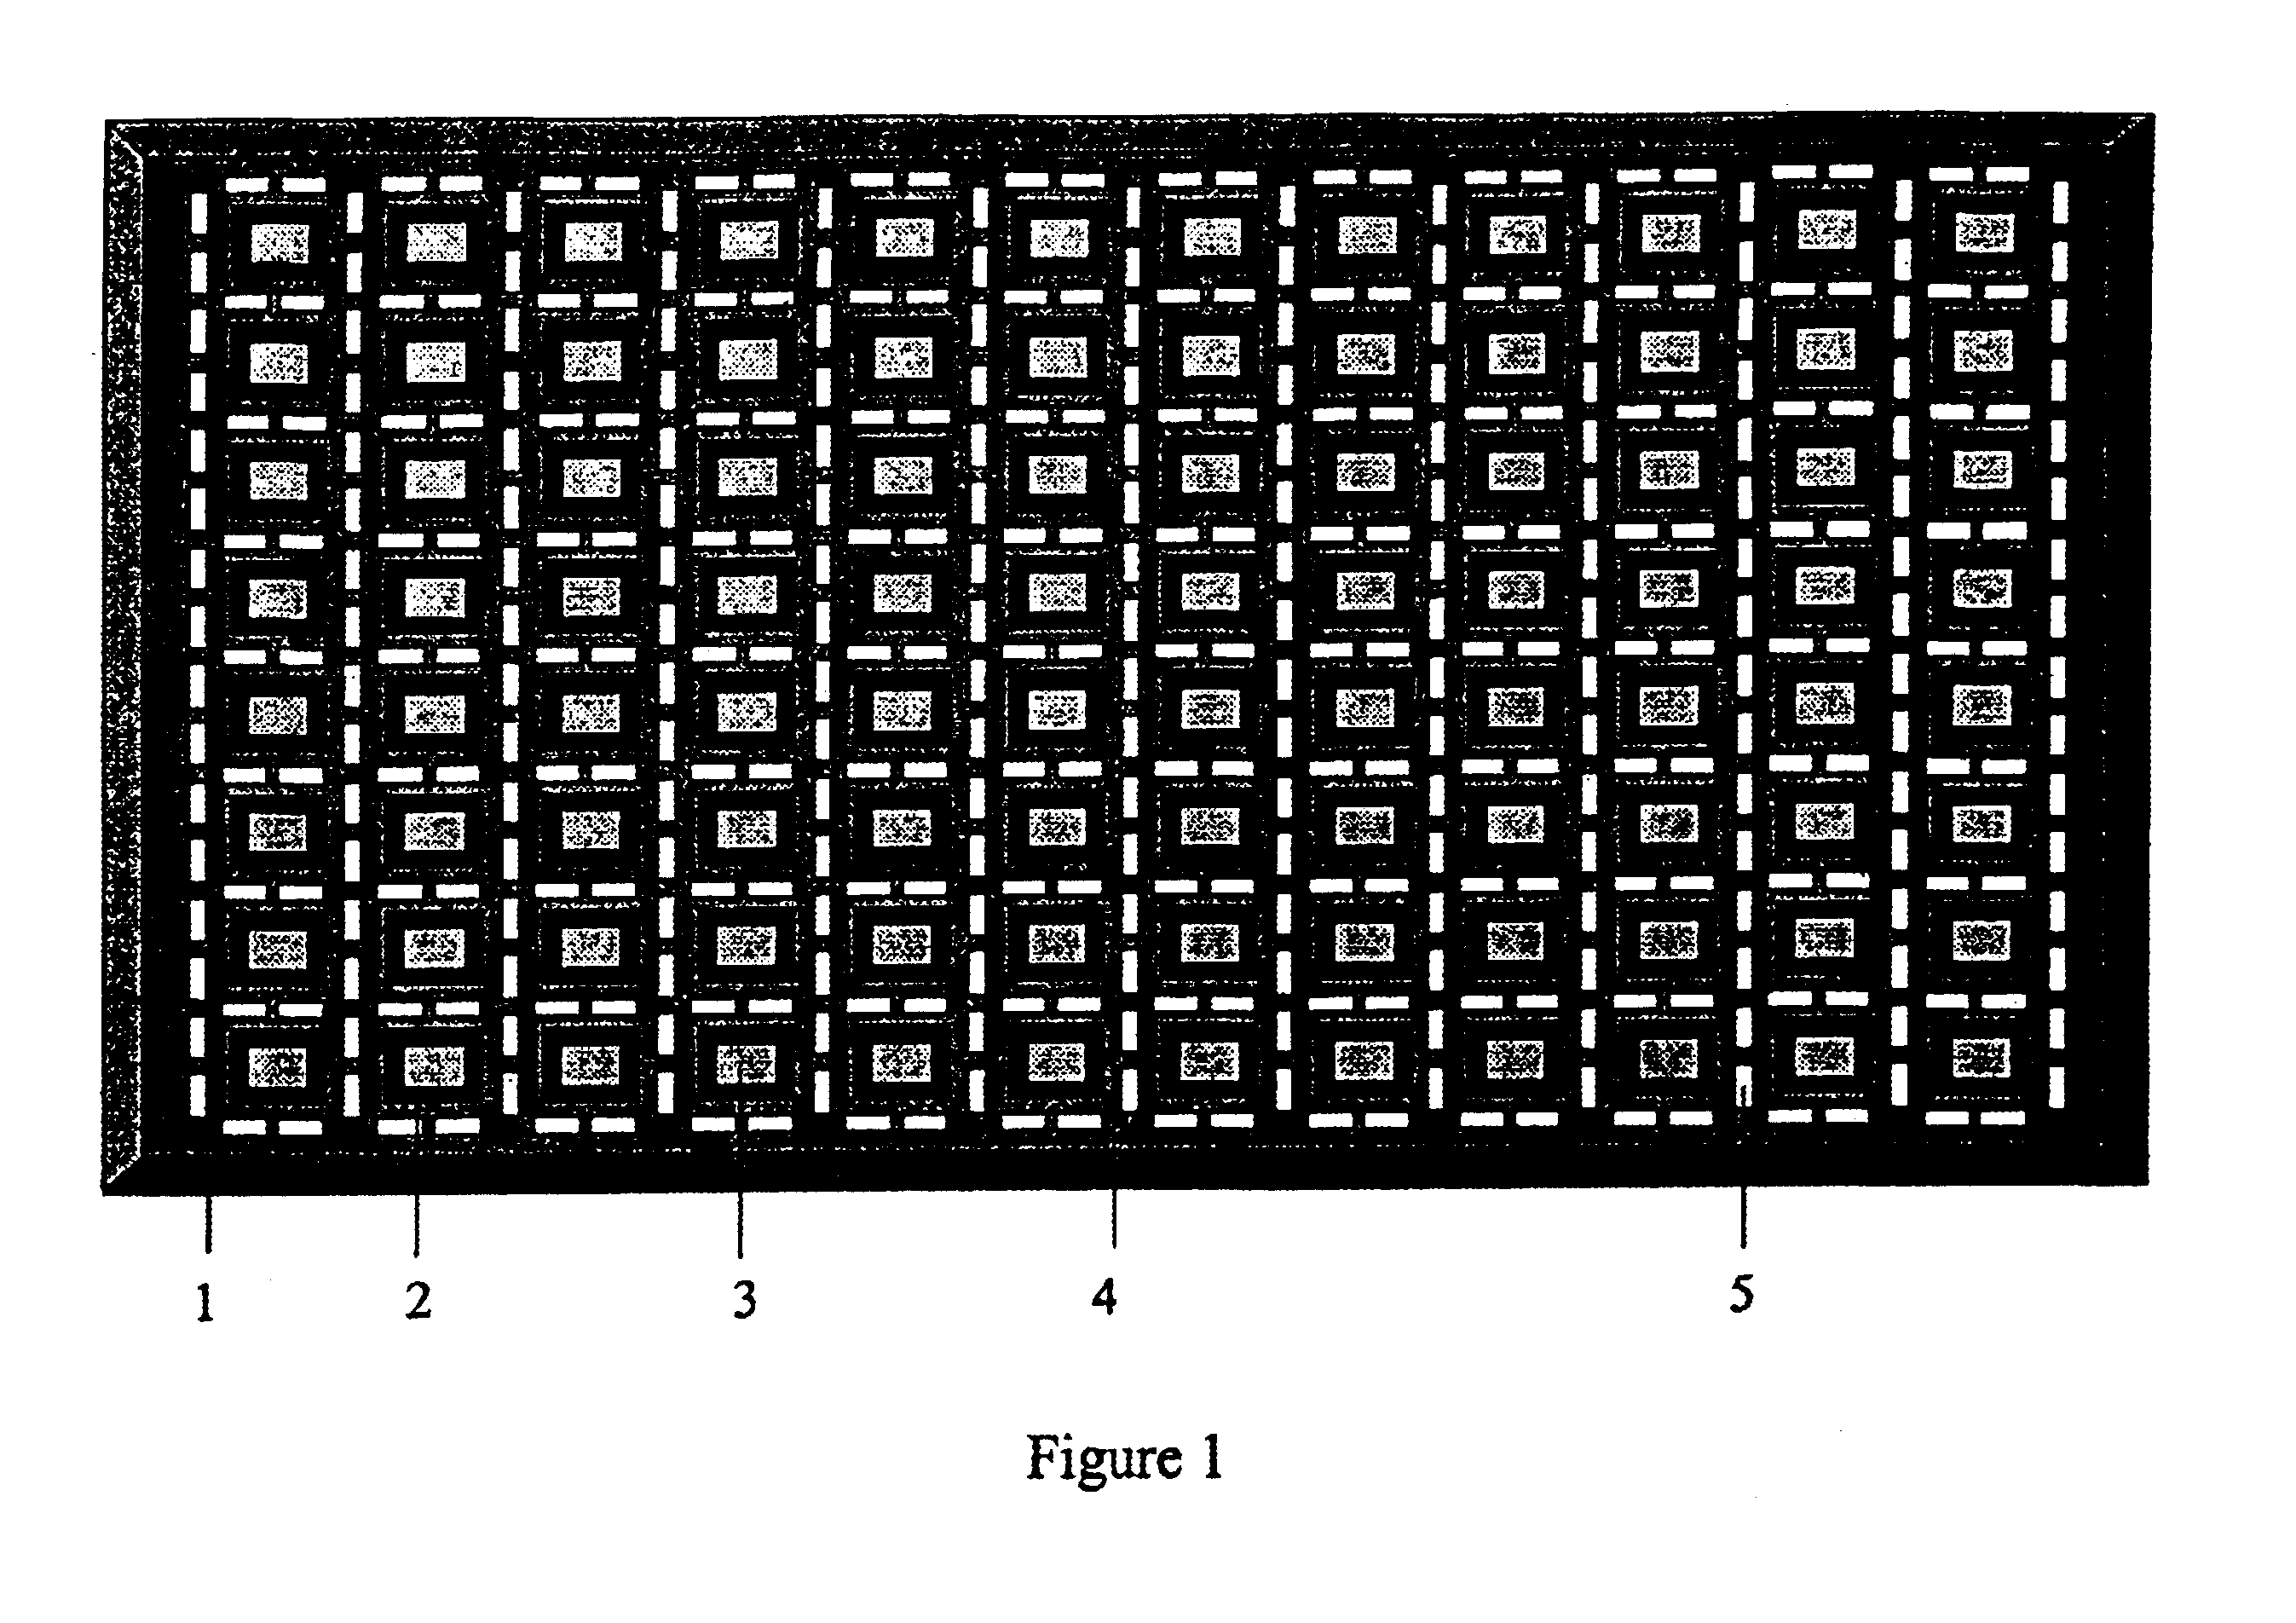 Integrated microarray devices